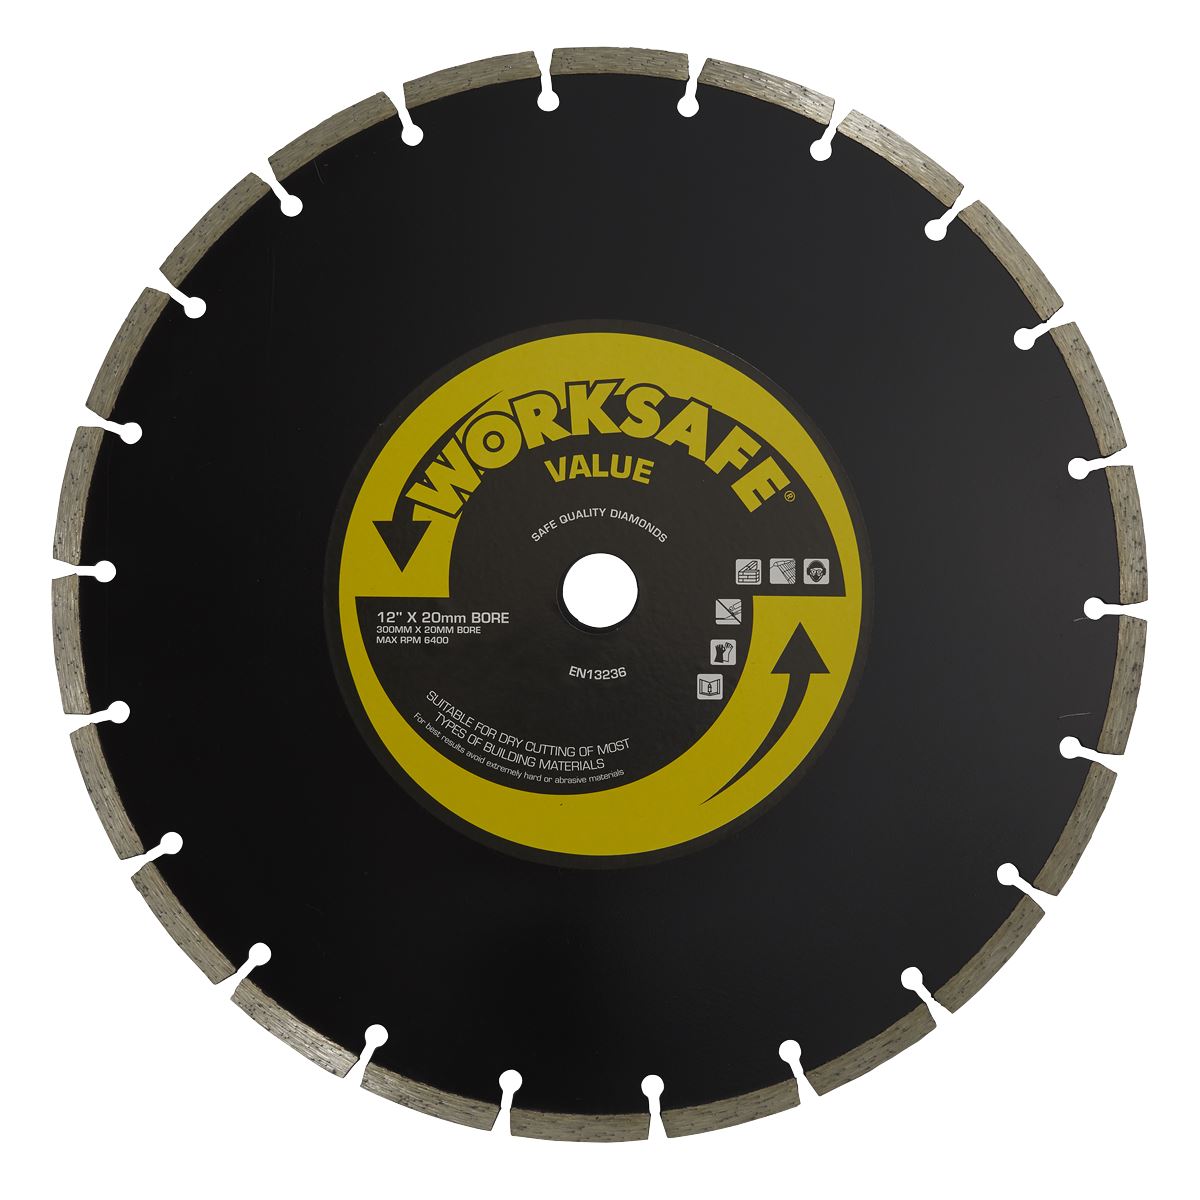 Worksafe by Sealey Diamond Cutting Blade 300mm x 20mm Bore Value